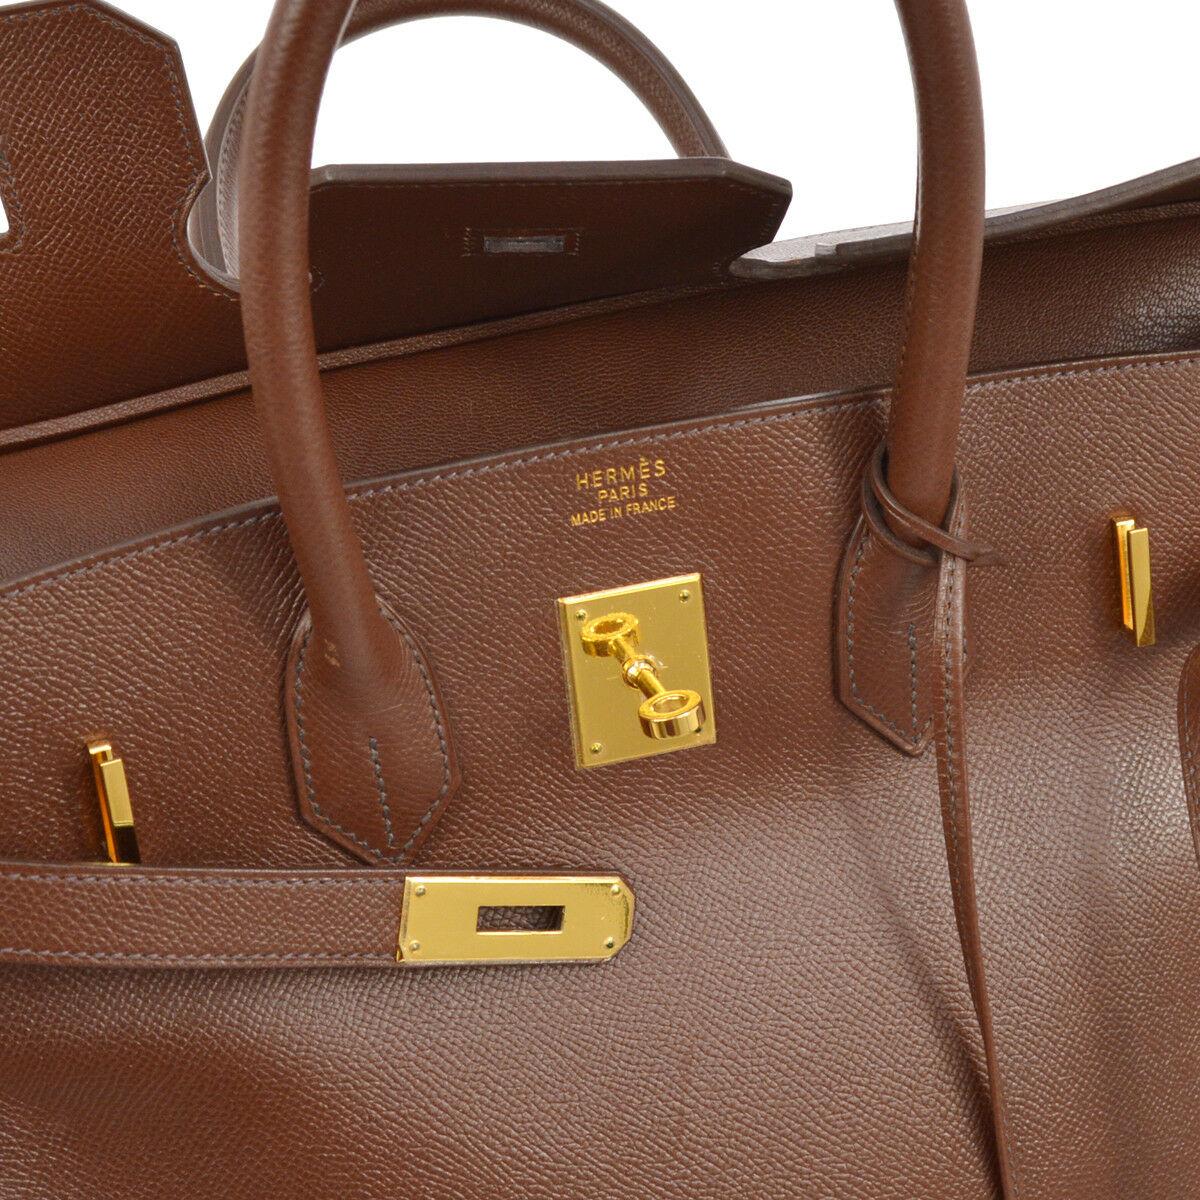 Hermes Birkin 35 Brown Leather Gold Top Carryall Handle Satchel Travel Tote Bag In Good Condition In Chicago, IL